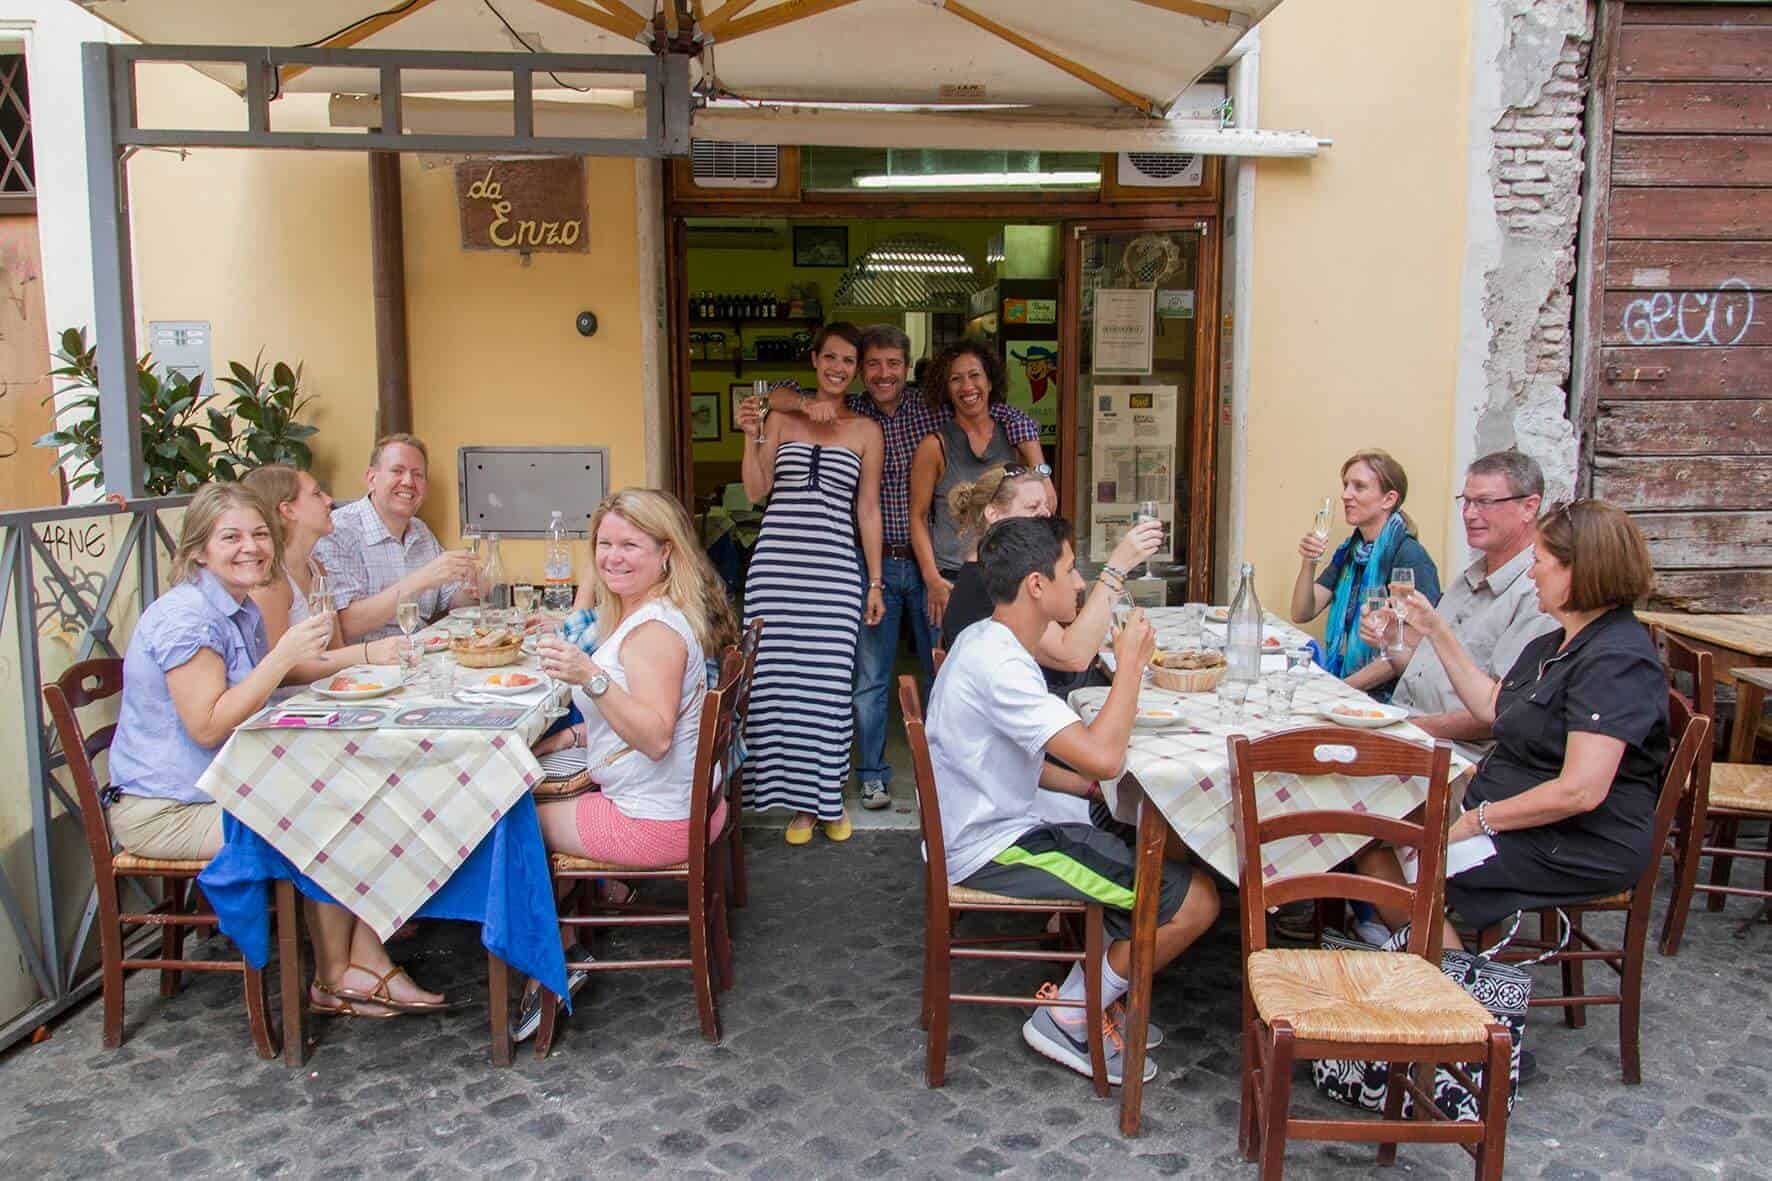 Trattoria Da Enzo is a tasty stop in Trastavere Rome on the Eating Europe Food Tour